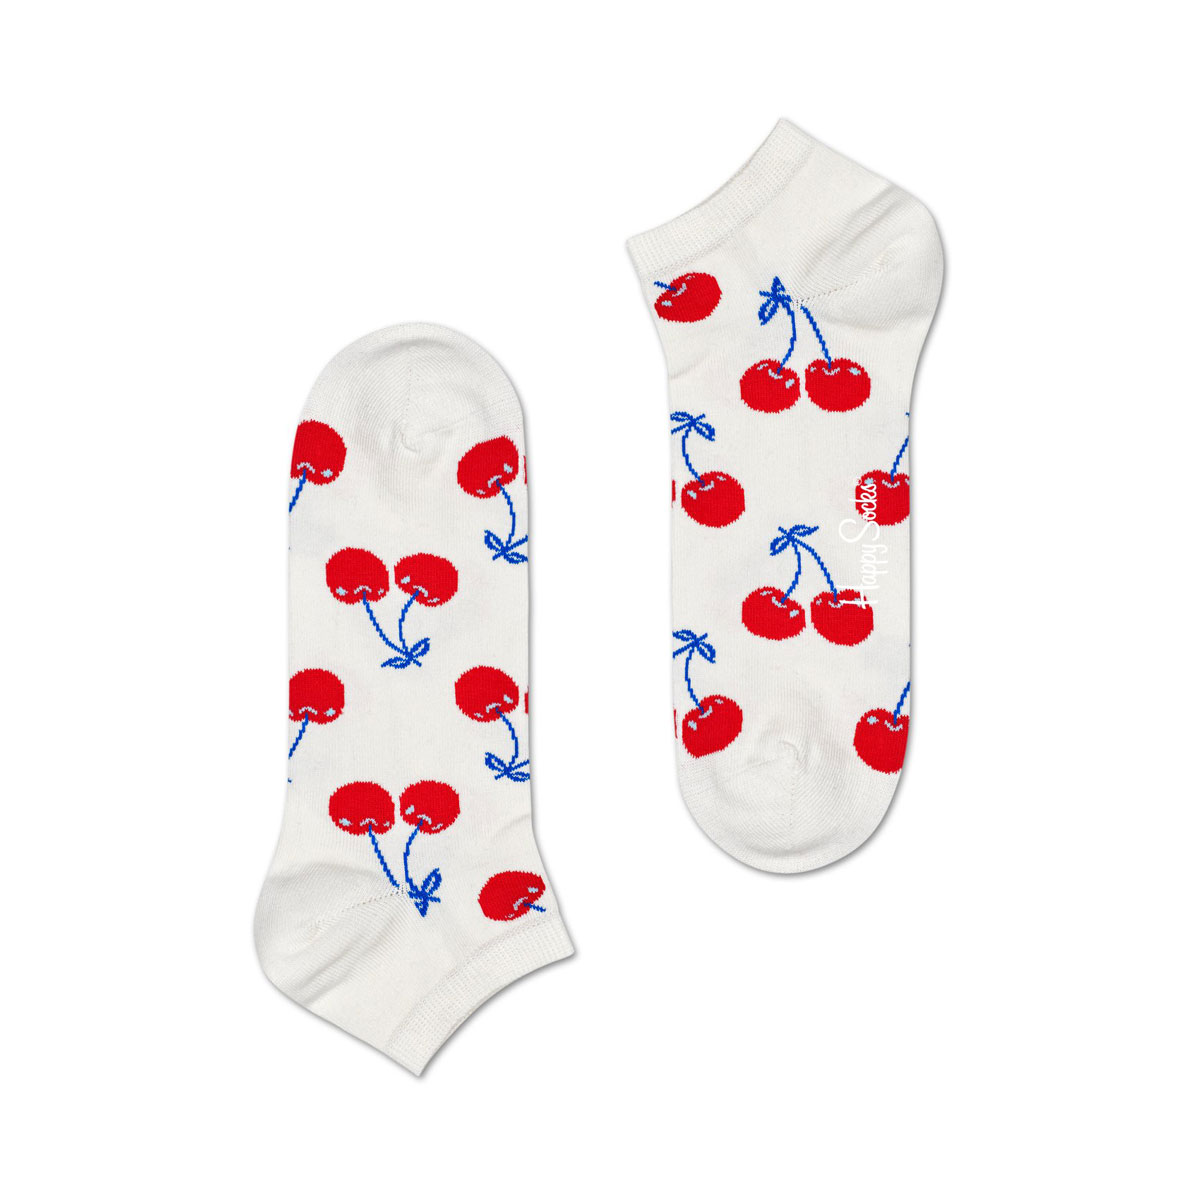 Cherry Low Sock <img src="/banner_images/banner_0000000180.gif">